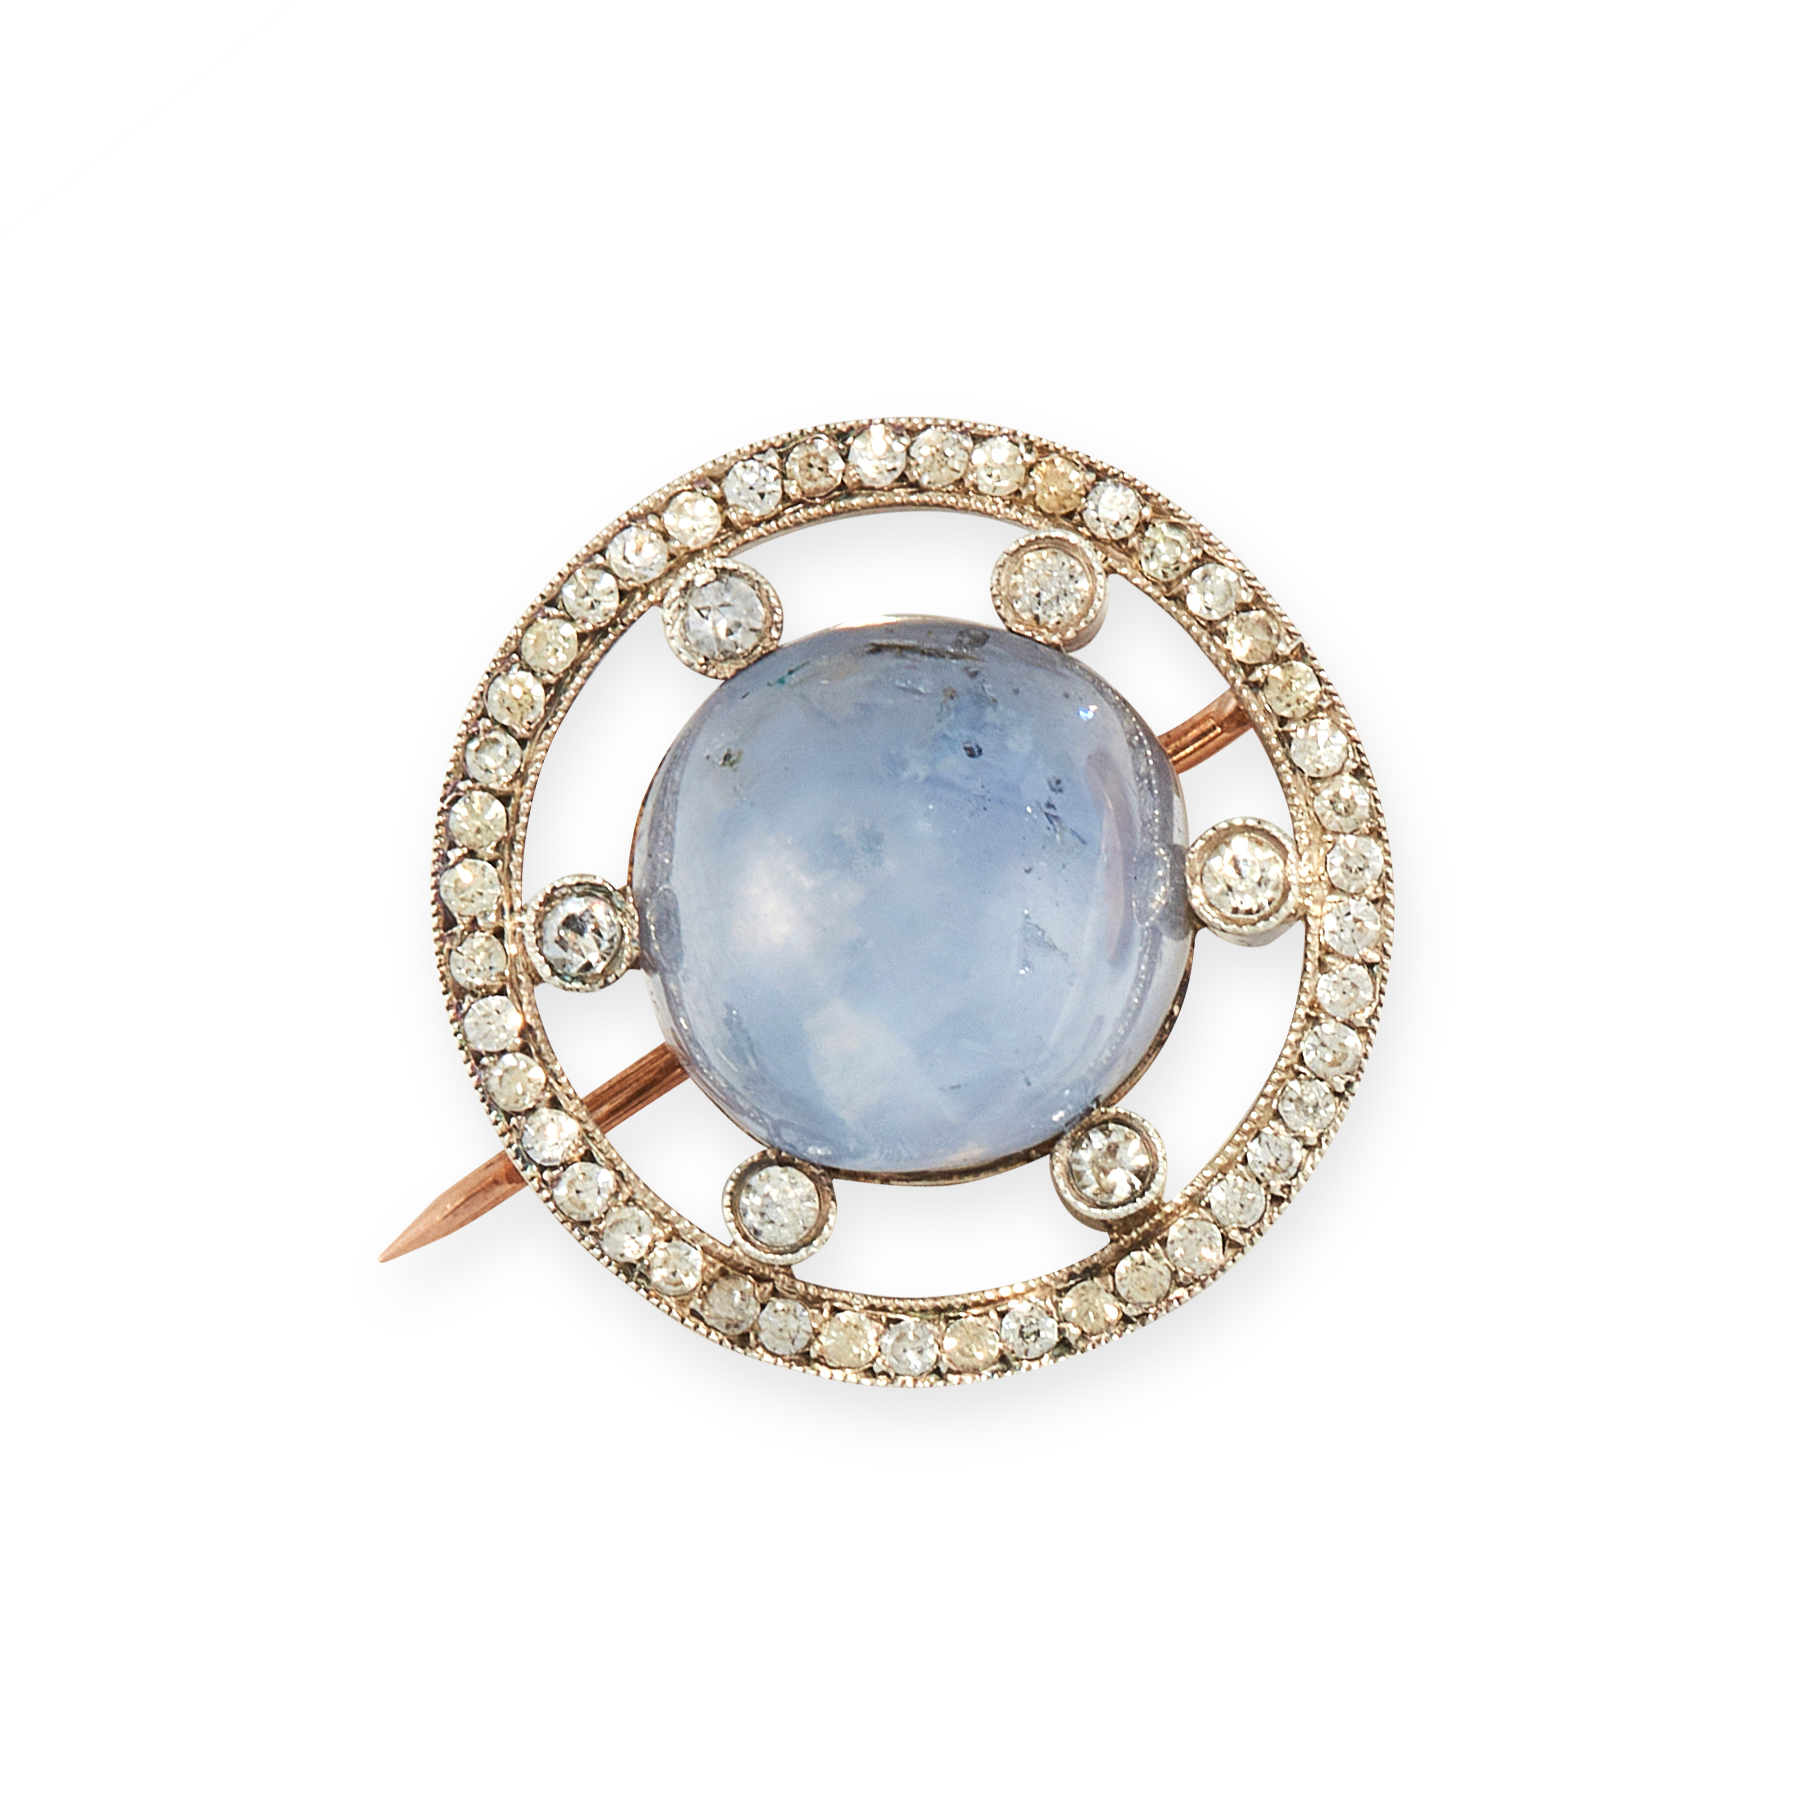 A STAR SAPPHIRE AND DIAMOND BROOCH in circular design, set with a central star sapphire of 20.35